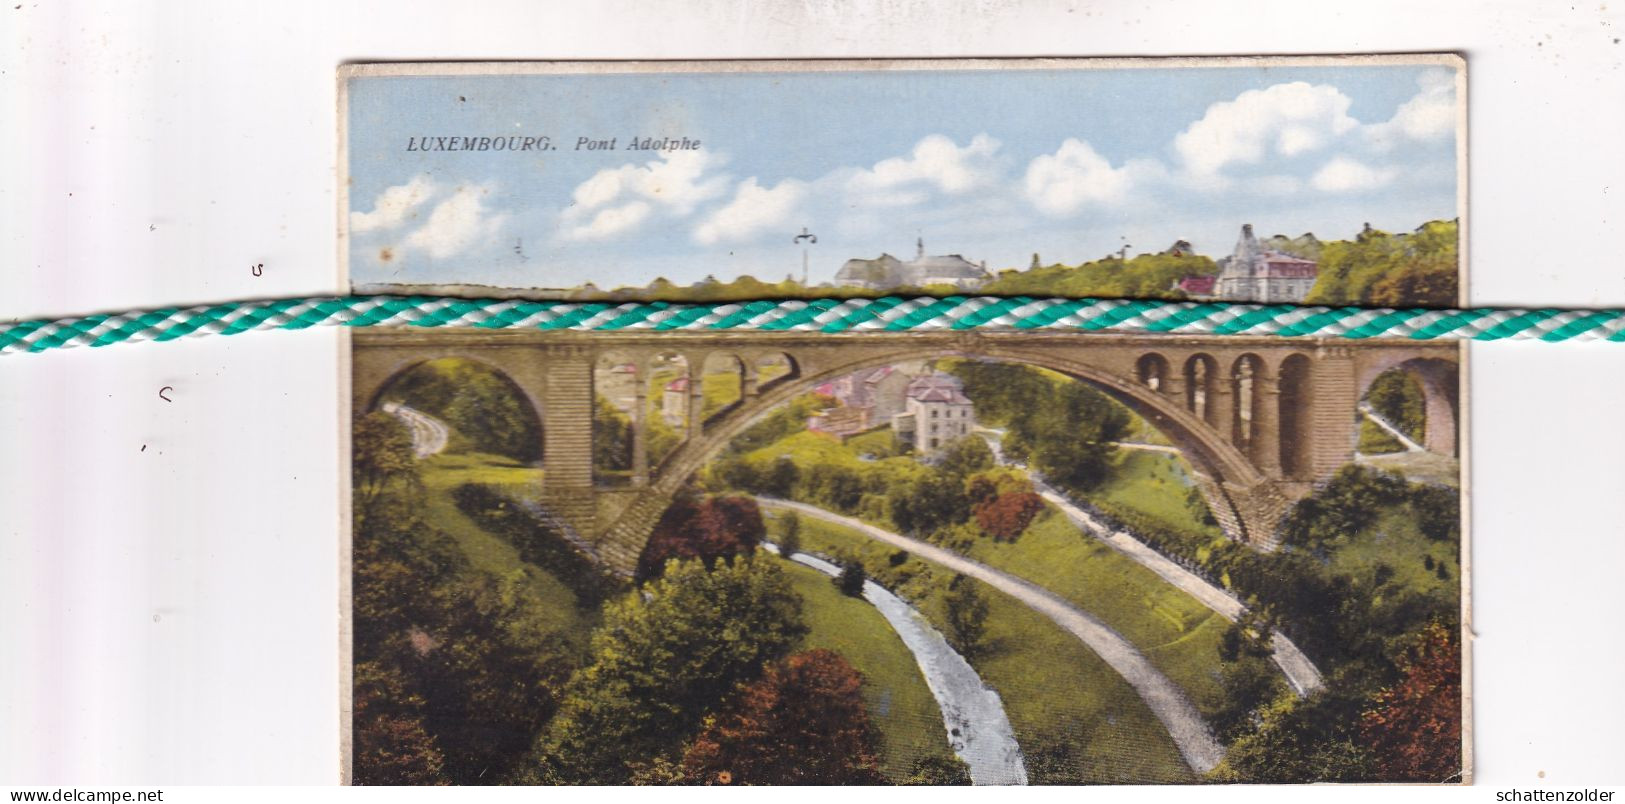 Luxembourg, Pont Adolphe 1927, Colorisé - Luxemburg - Stadt